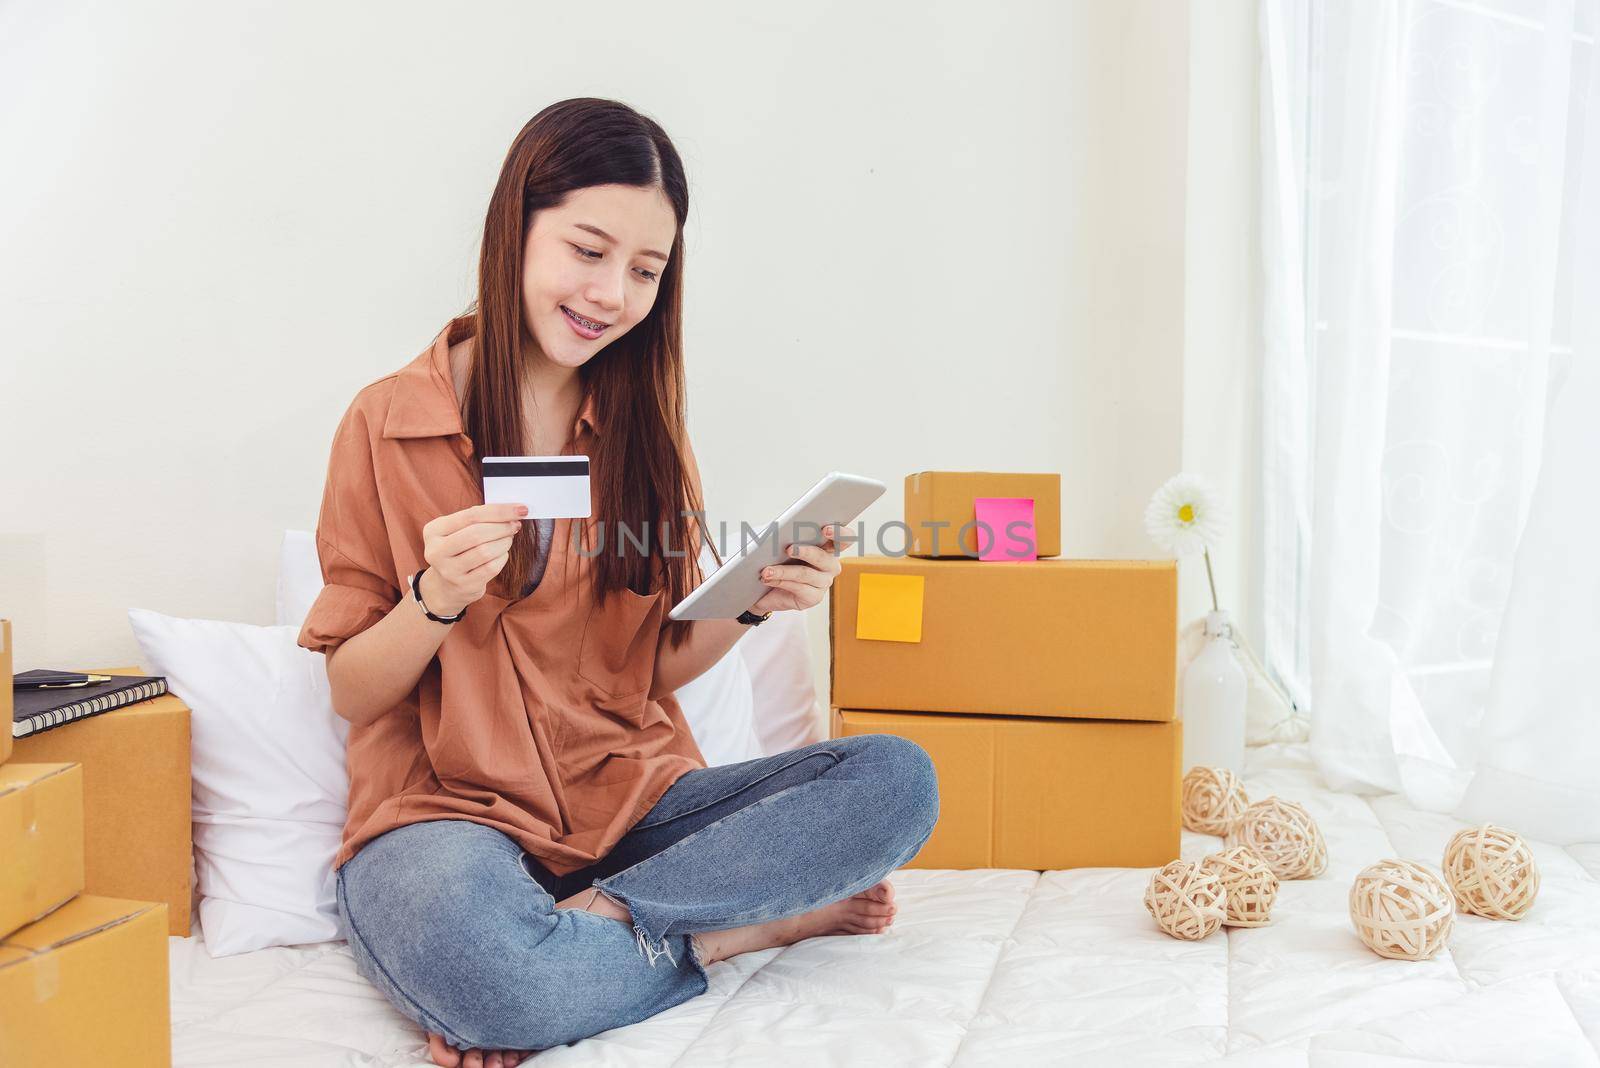 Beauty Asian woman using tablet and credit card. Start up small business entrepreneur SME and checking order list in bedroom, Young happy freelance woman shopping online marketing or sending parcel